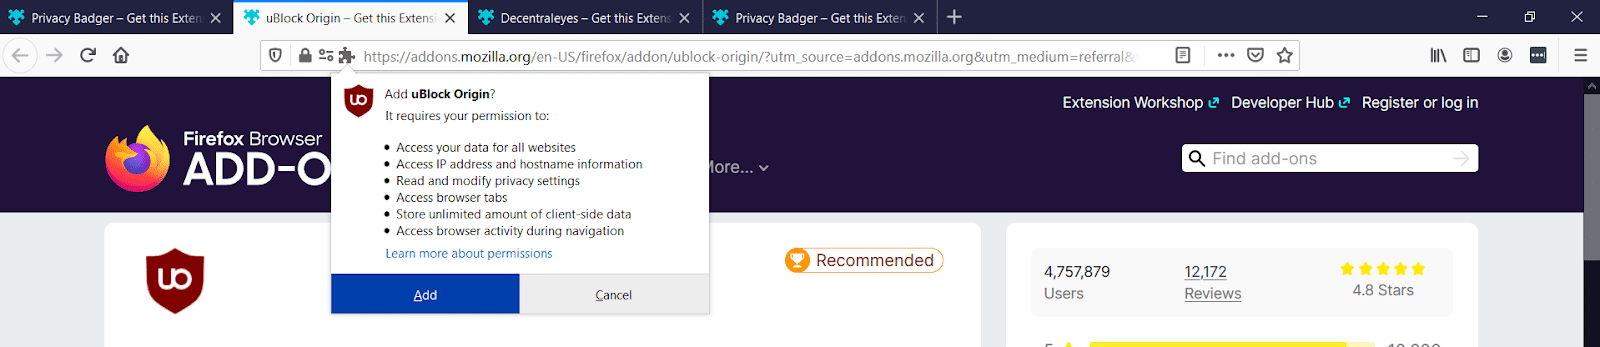 Firefox extension permissions